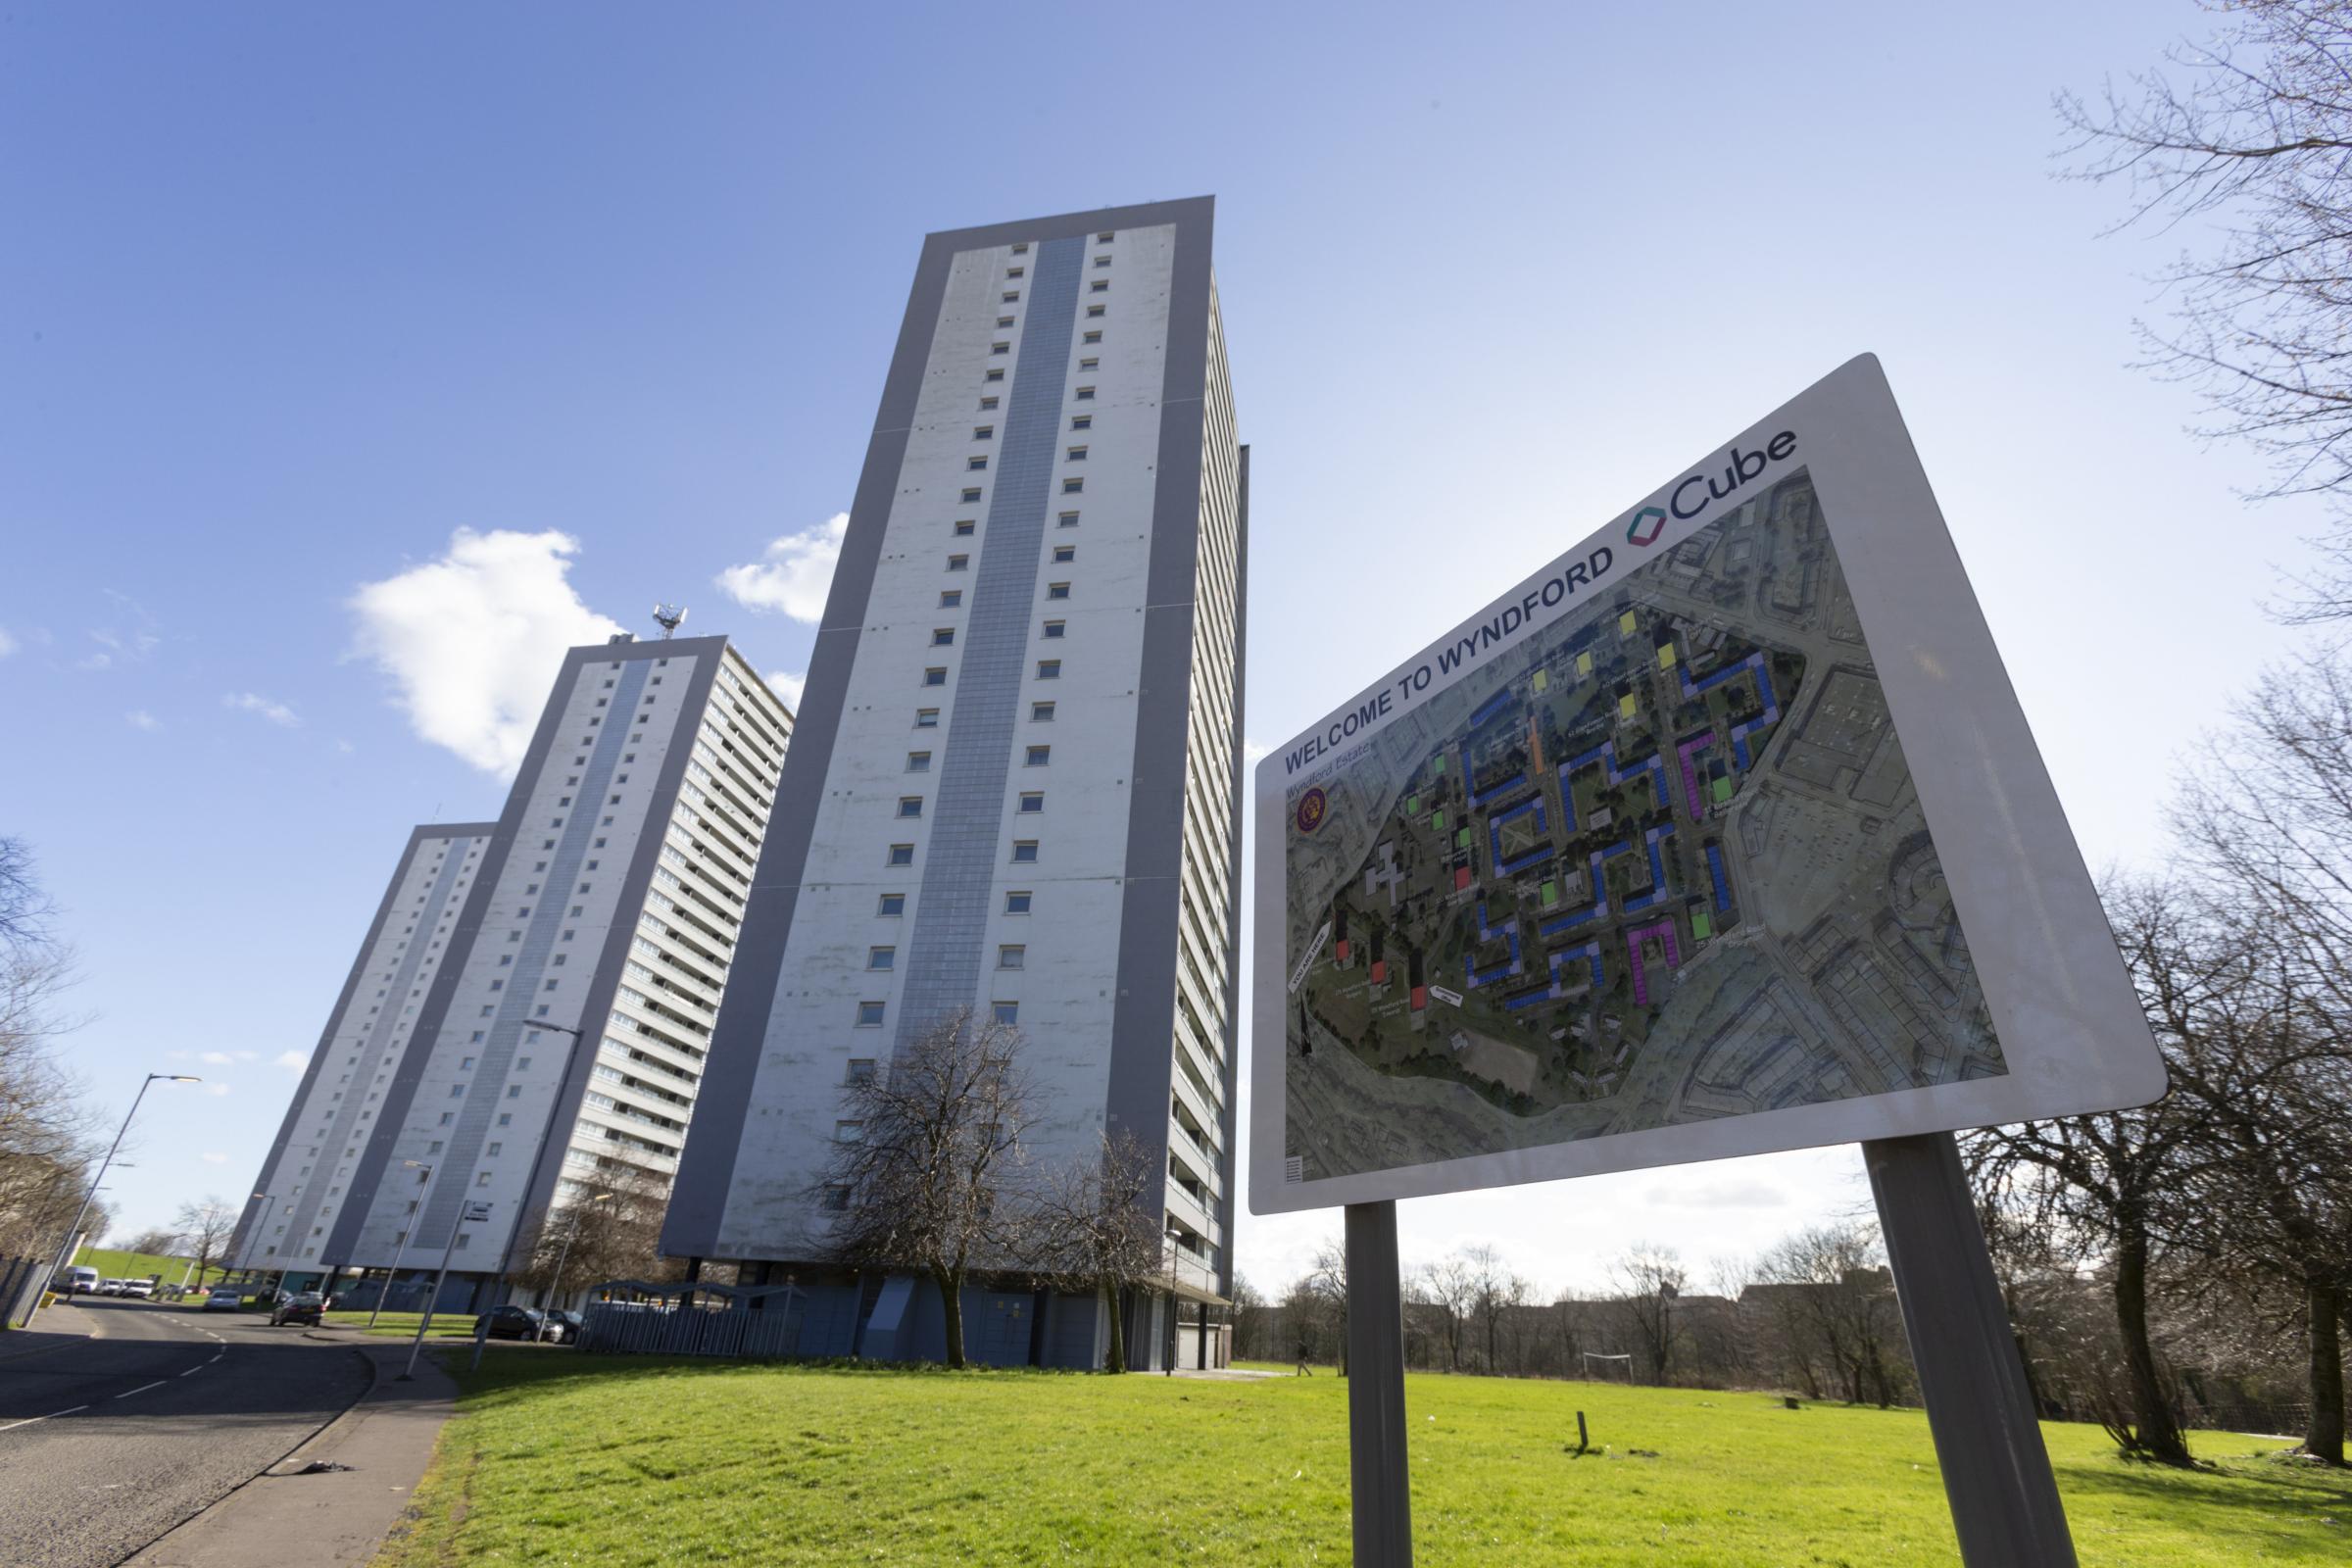 Wynford tower blocks were built on the site of the former Maryhill Barracks